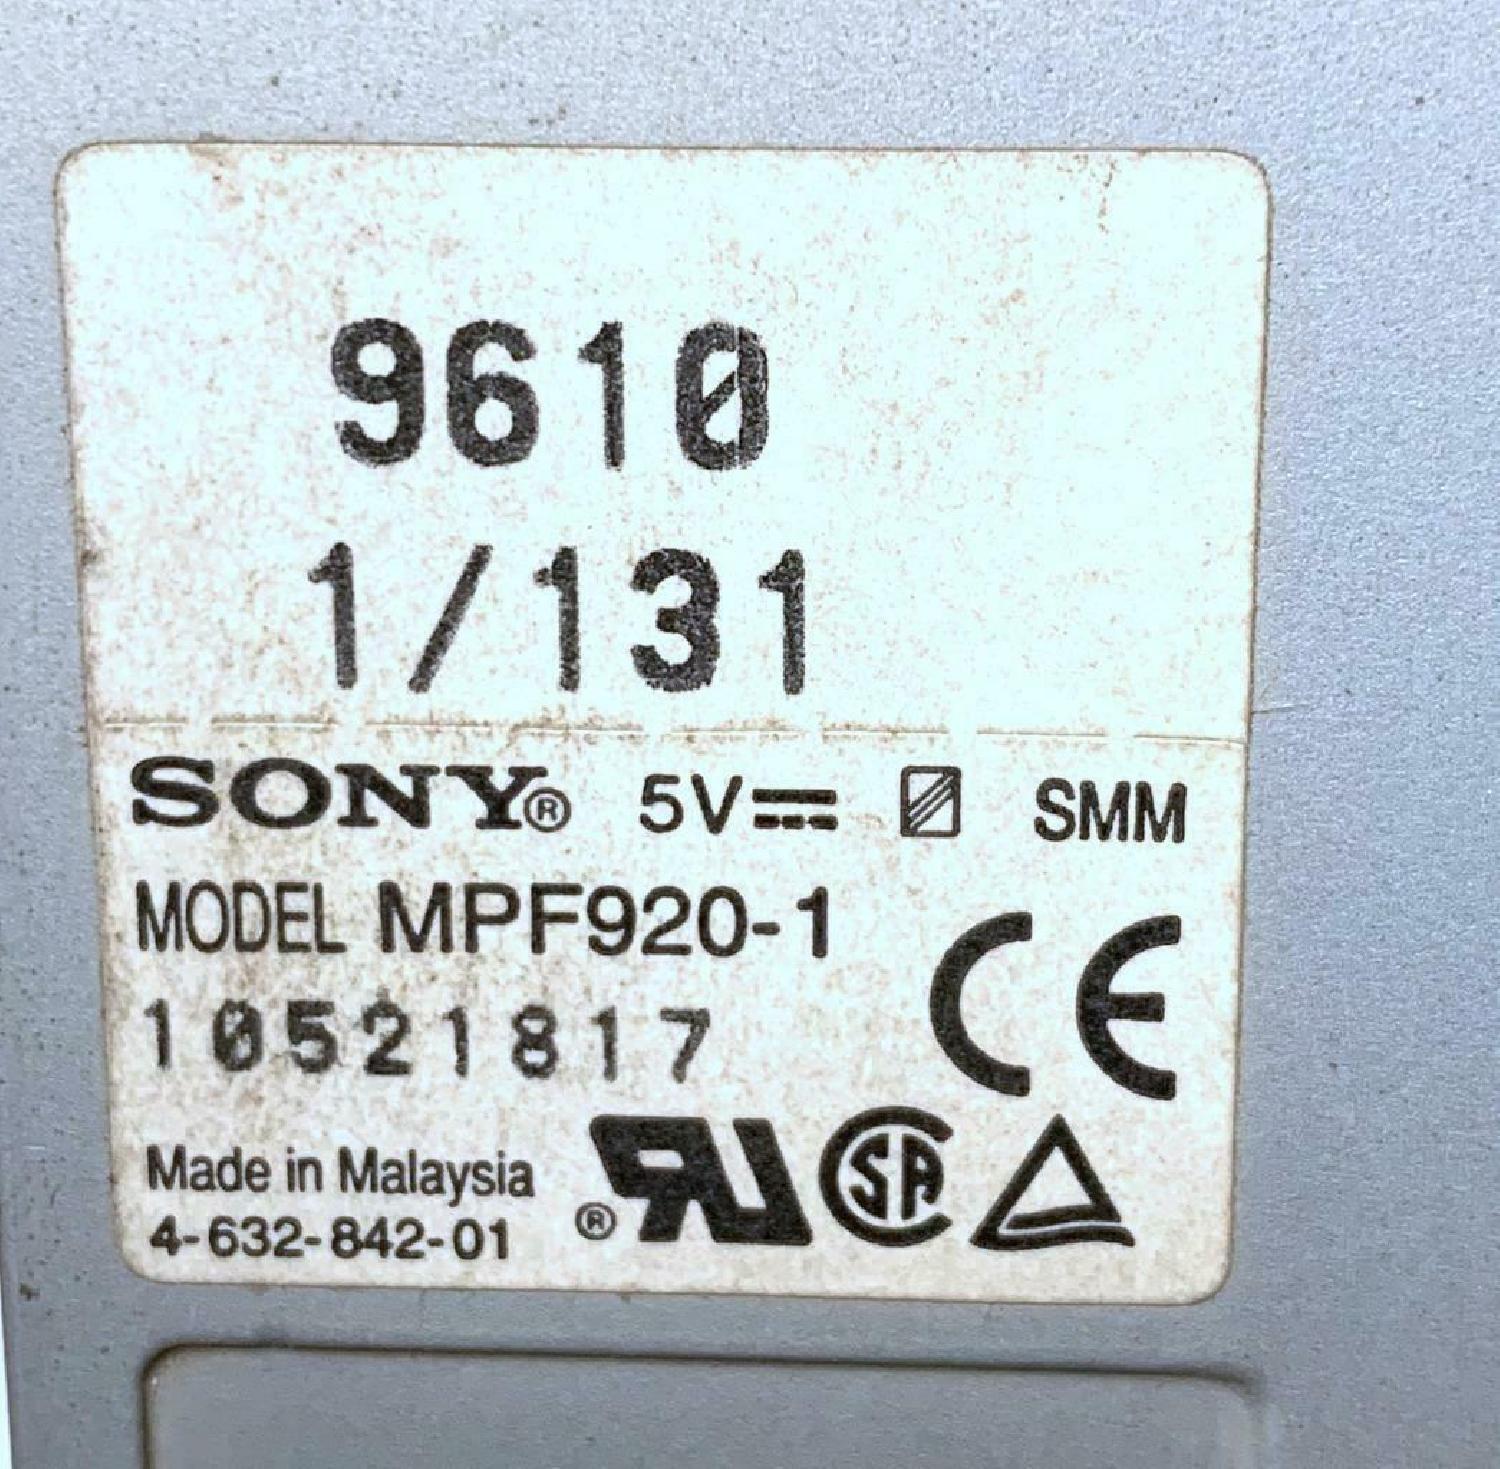 MPF920-1 SONY 1.44 FLOPPY DRIVE BLACK FACE PULLED FROM NOKIA 440 FIREWALL 1.44M